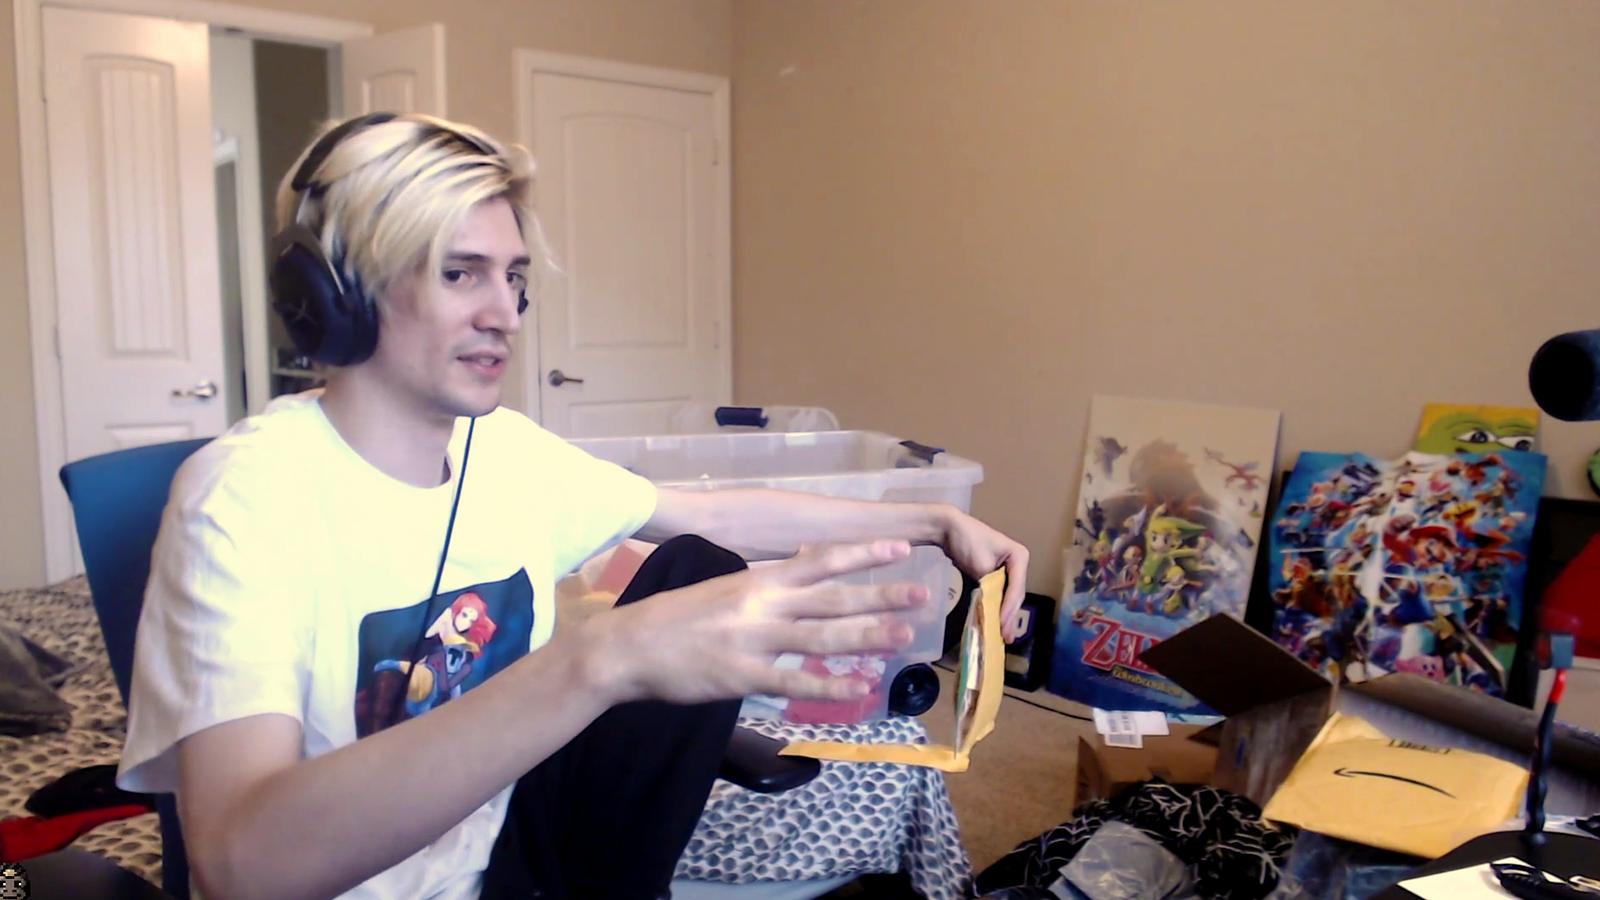 xQc opening fan mail on Twitch stream